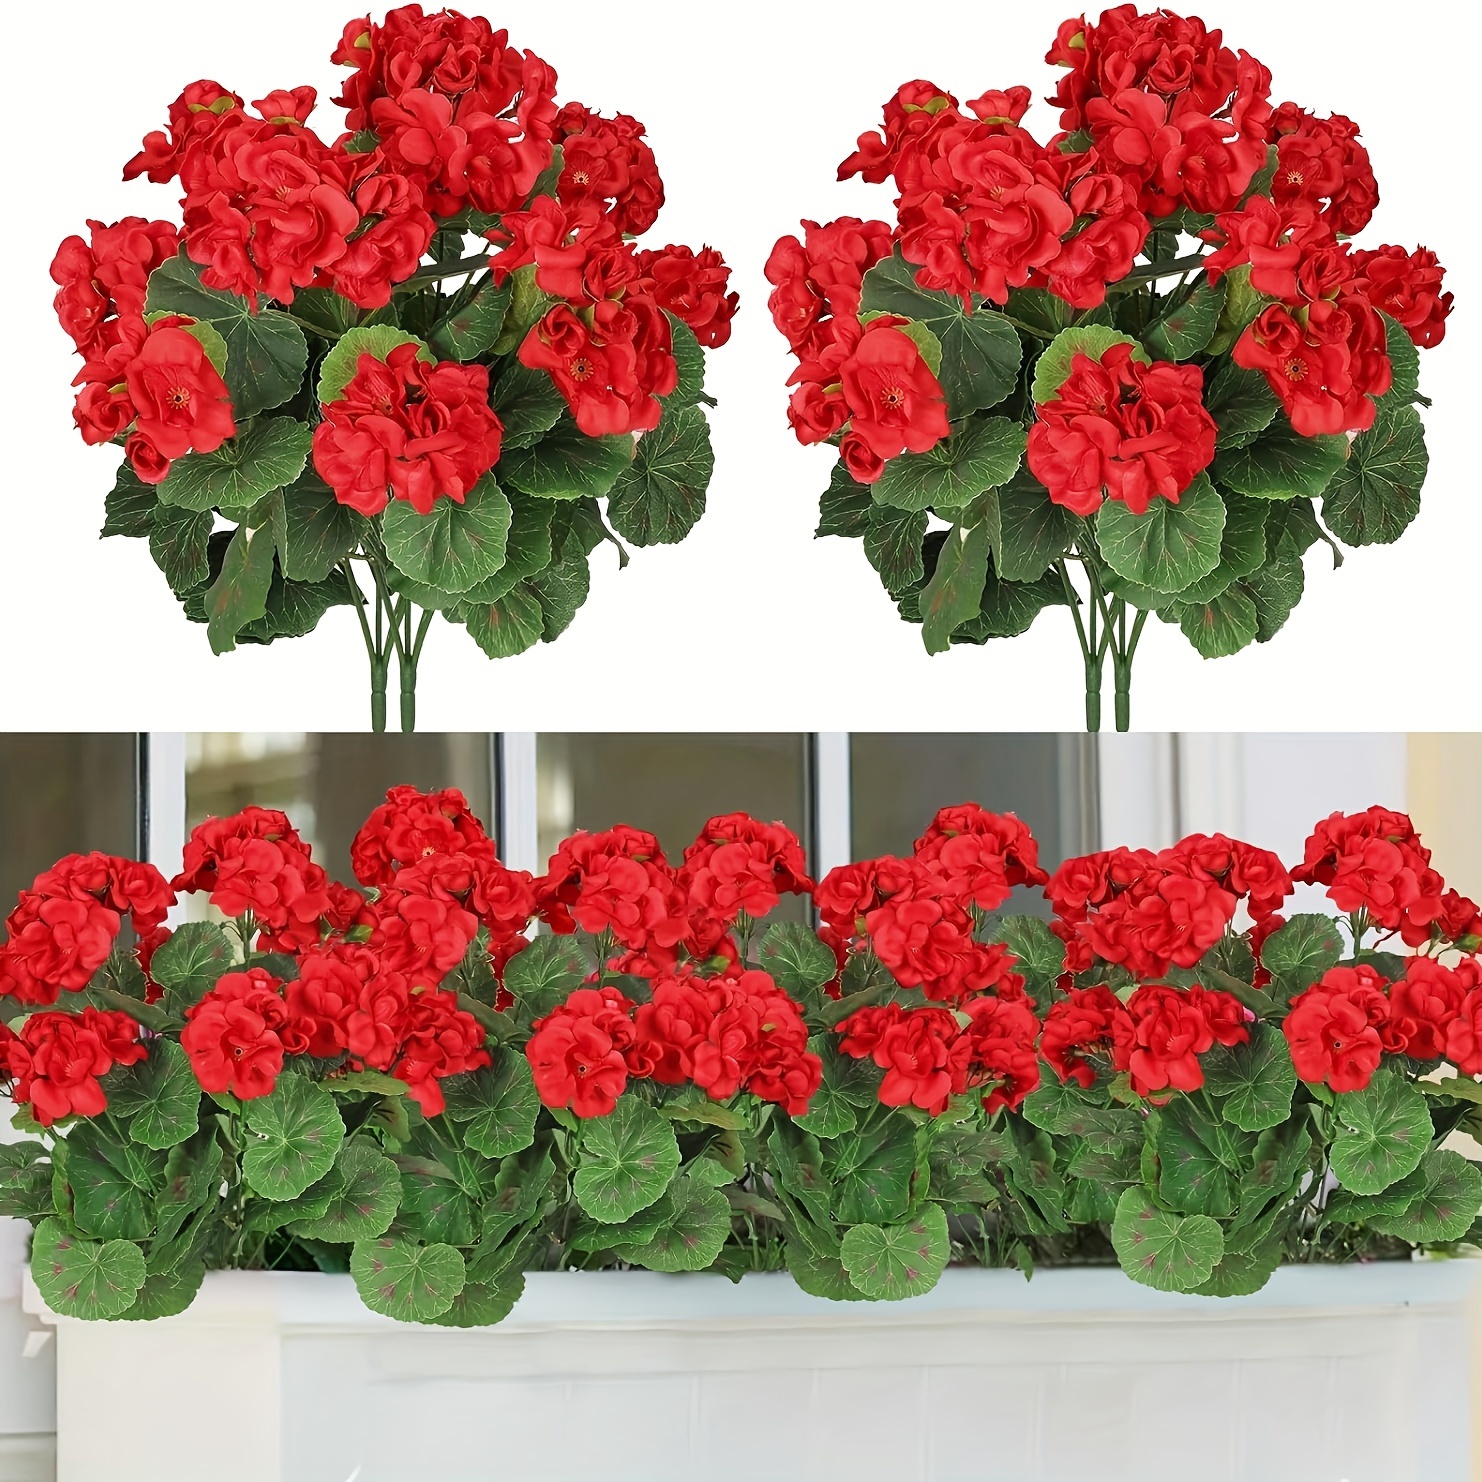 

3 Bouquets, Artificial Geranium Shrub Red, Beautiful Flowers, Outdoor And Indoor Gardens, Courtyards, Cemeteries, Central Vase Tabletops, Wedding Bride Bouquets, Holiday Party Bouquets, Decorations